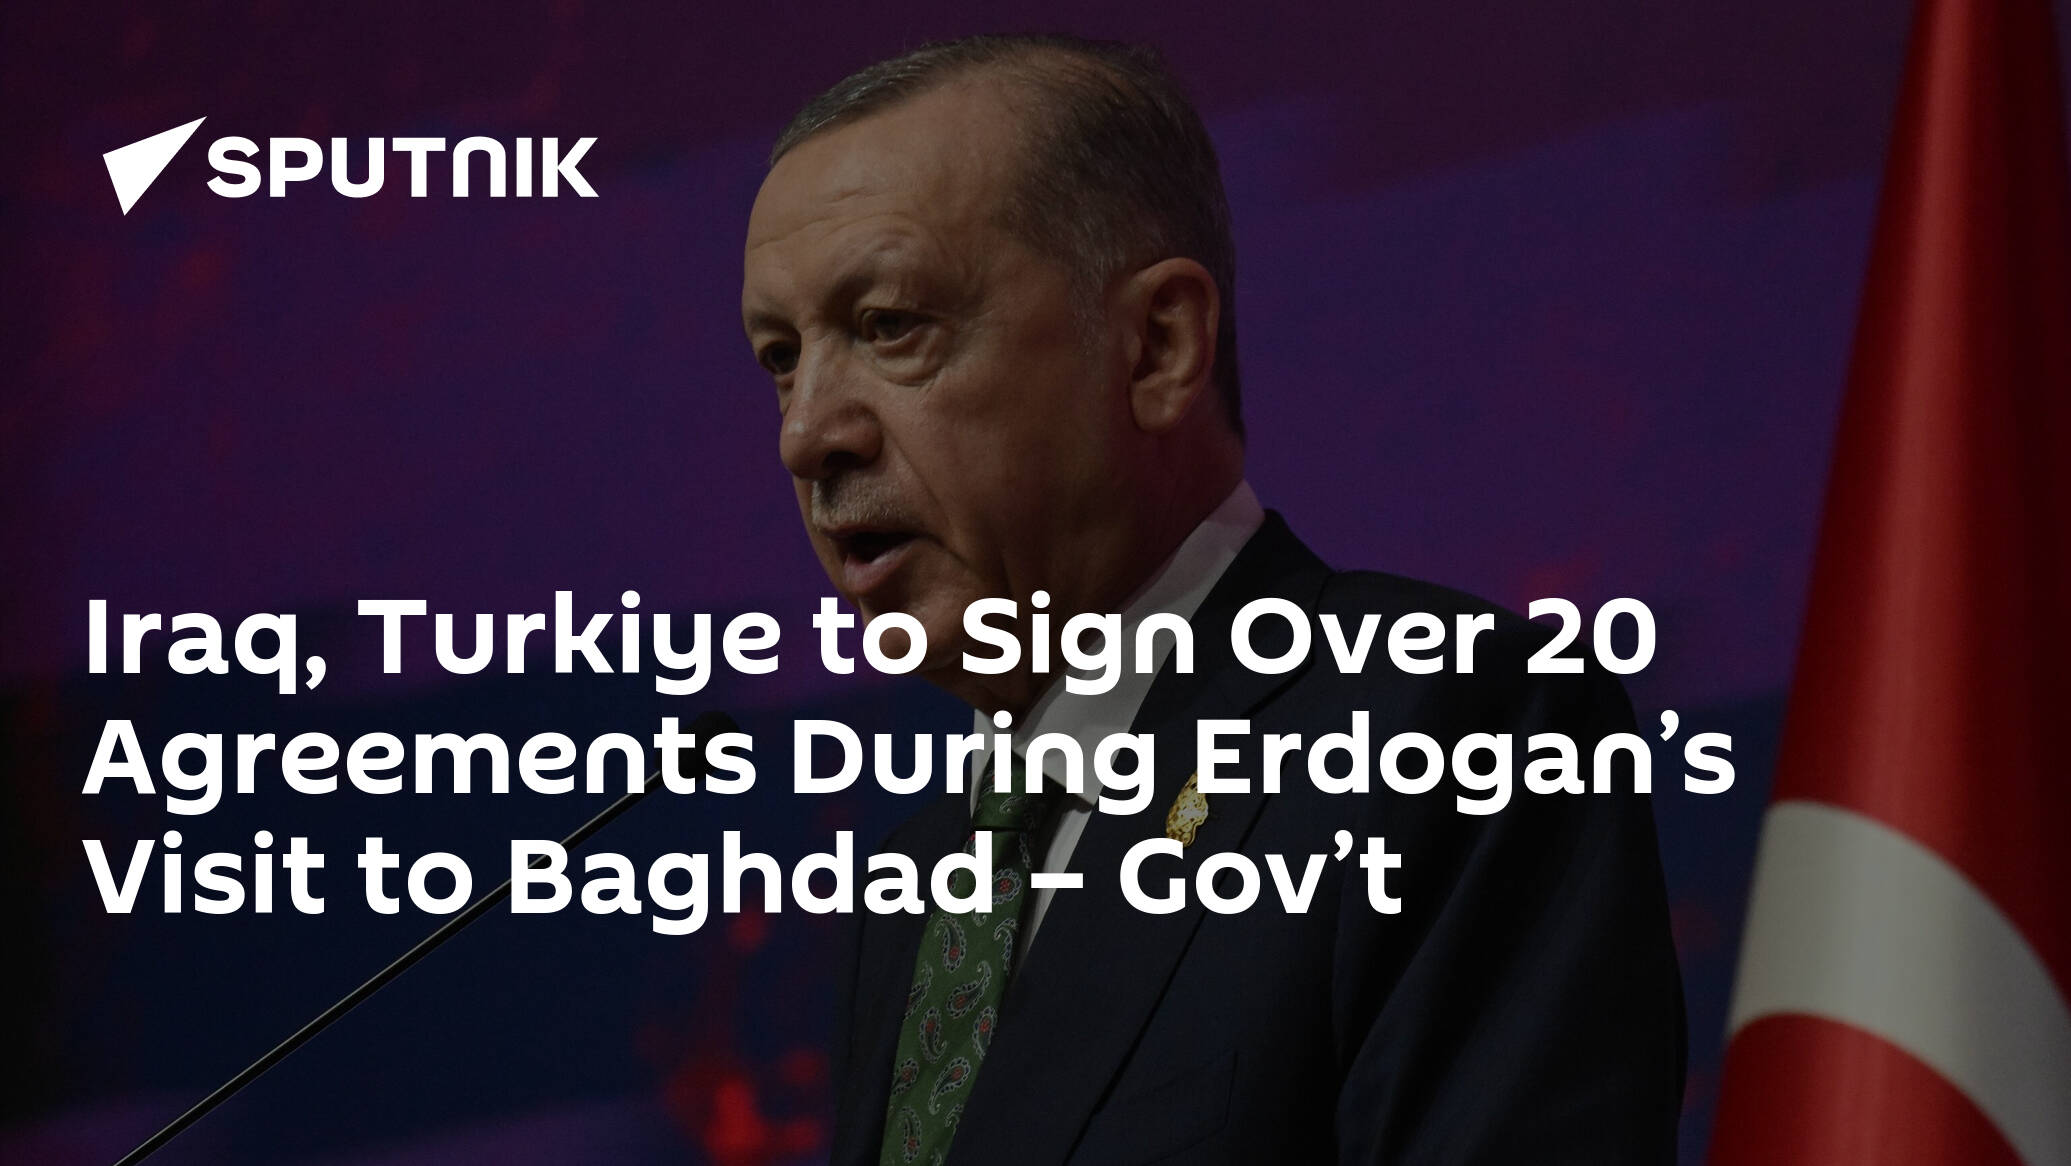 Iraq, Turkey to Sign Over 20 Agreements During Erdogan’s Visit to Baghdad – Gov’t